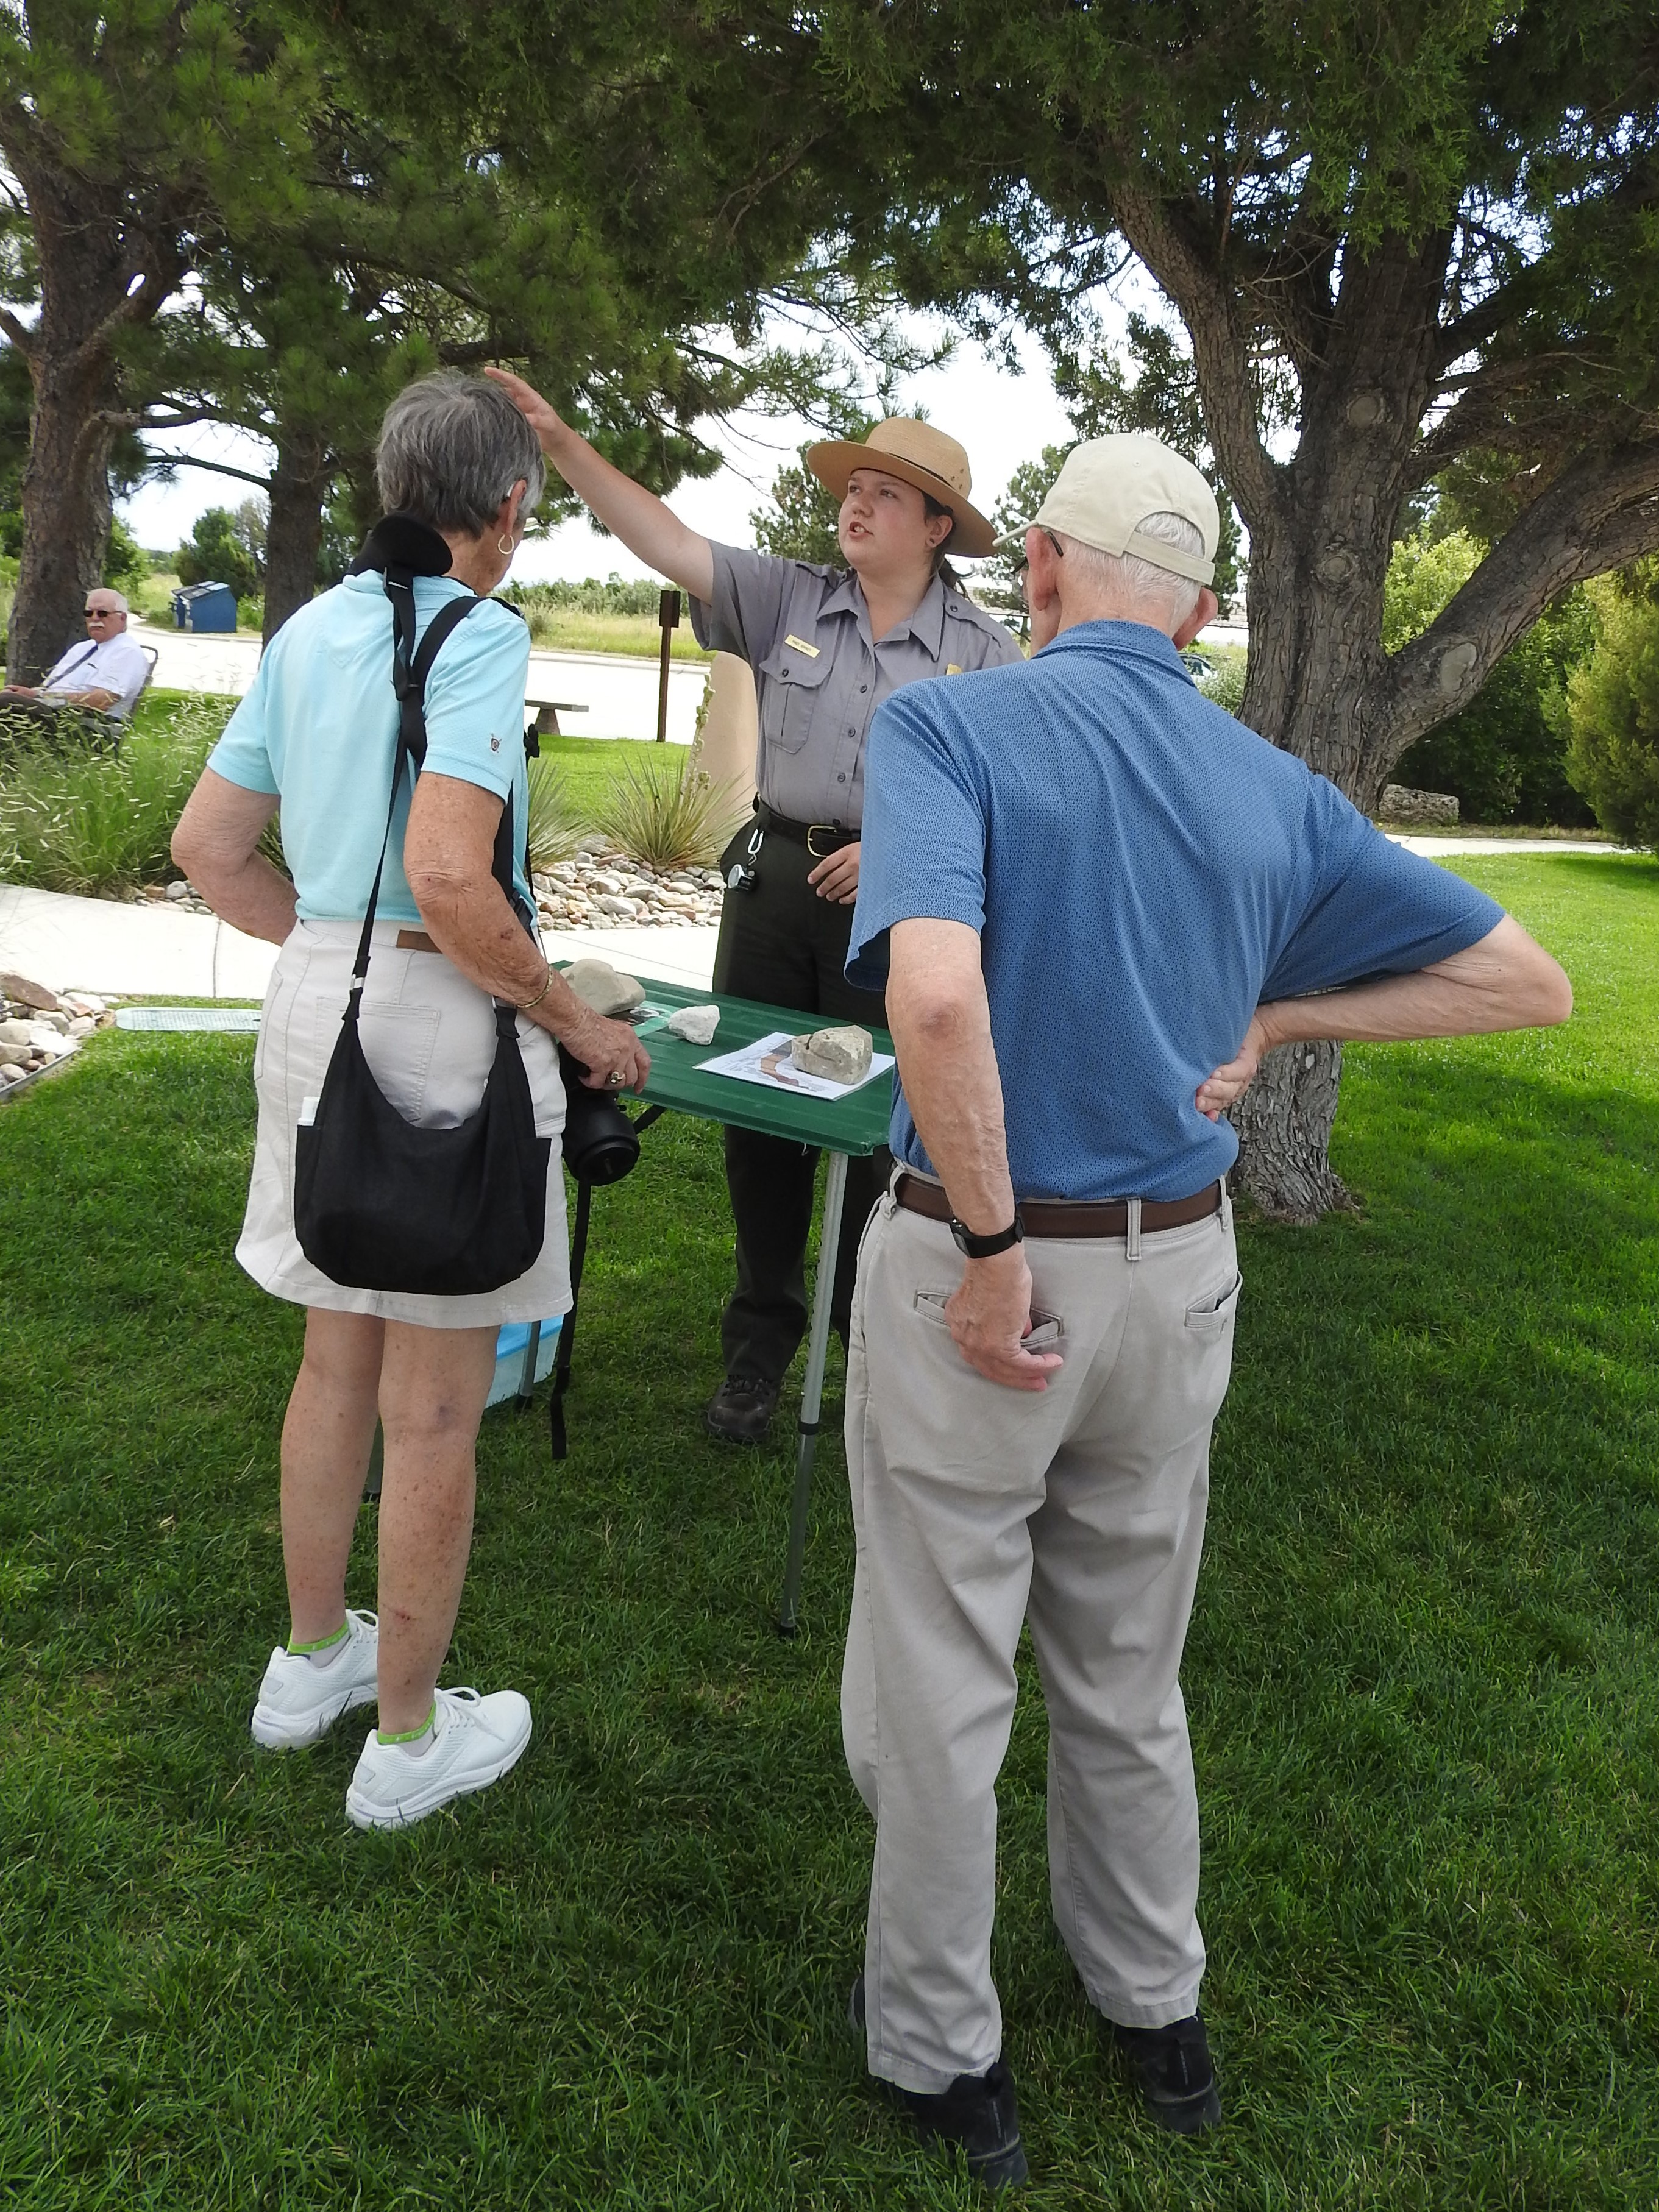 A park ranger points as she talks to two visitors on a grassy lawn.